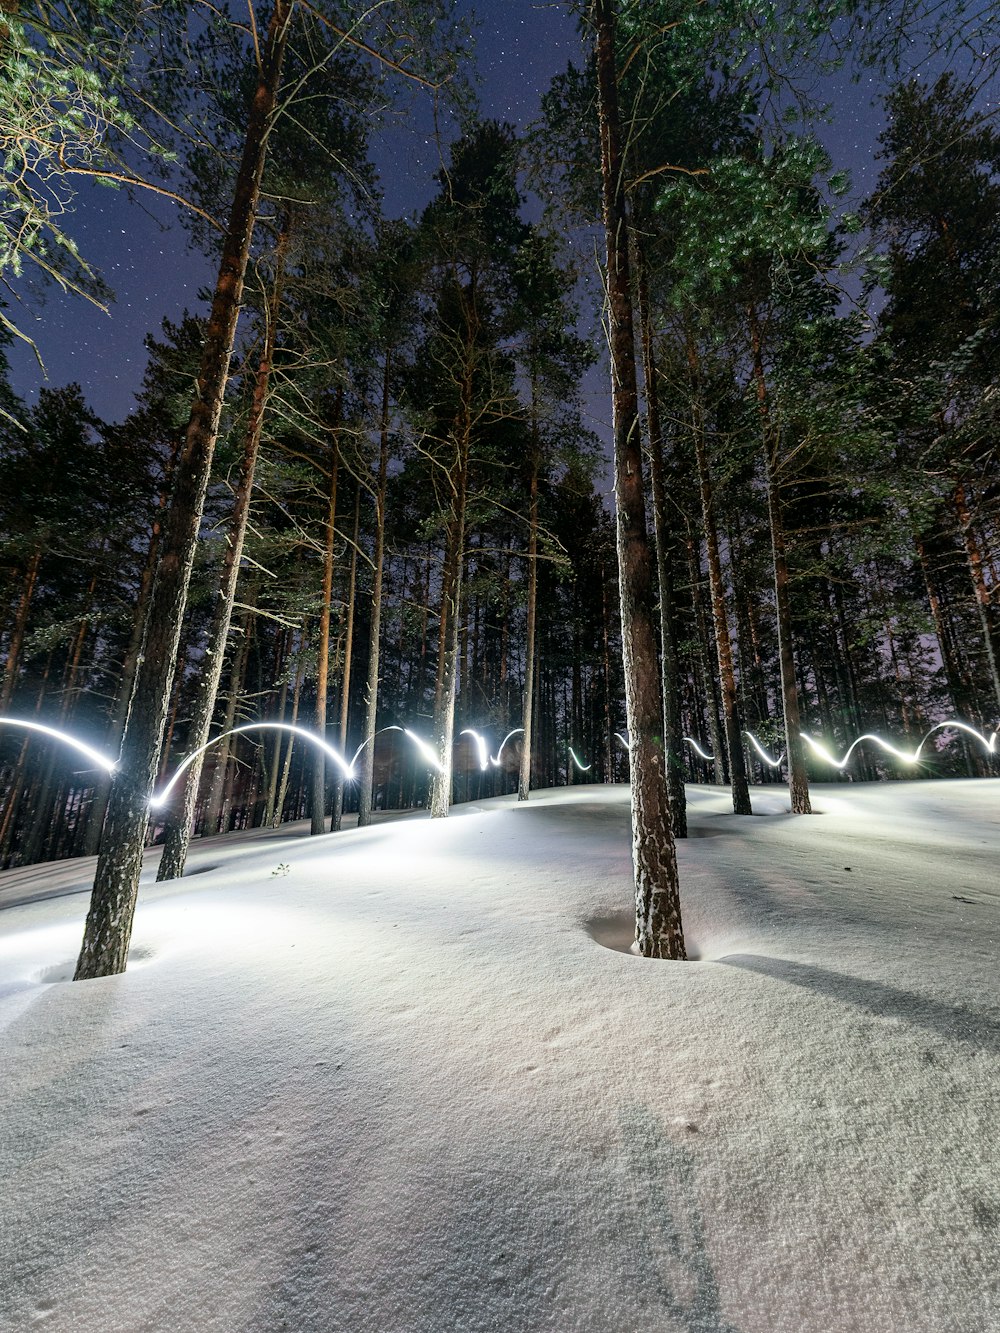 a night time scene of a snow covered forest